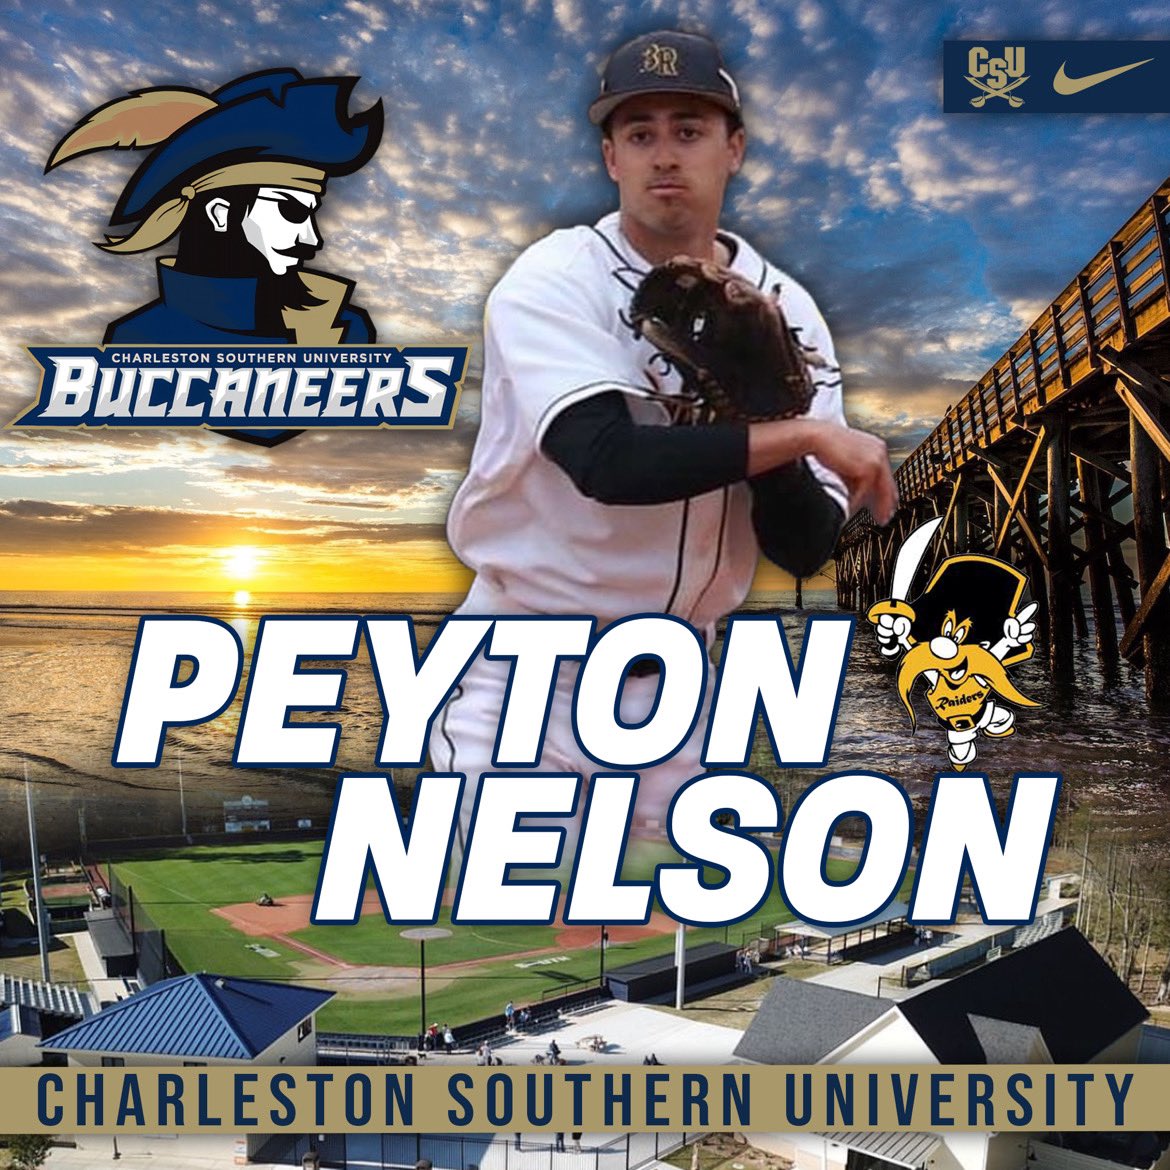 Excited to announce my commitment to Charleston Southern University! #gobucs